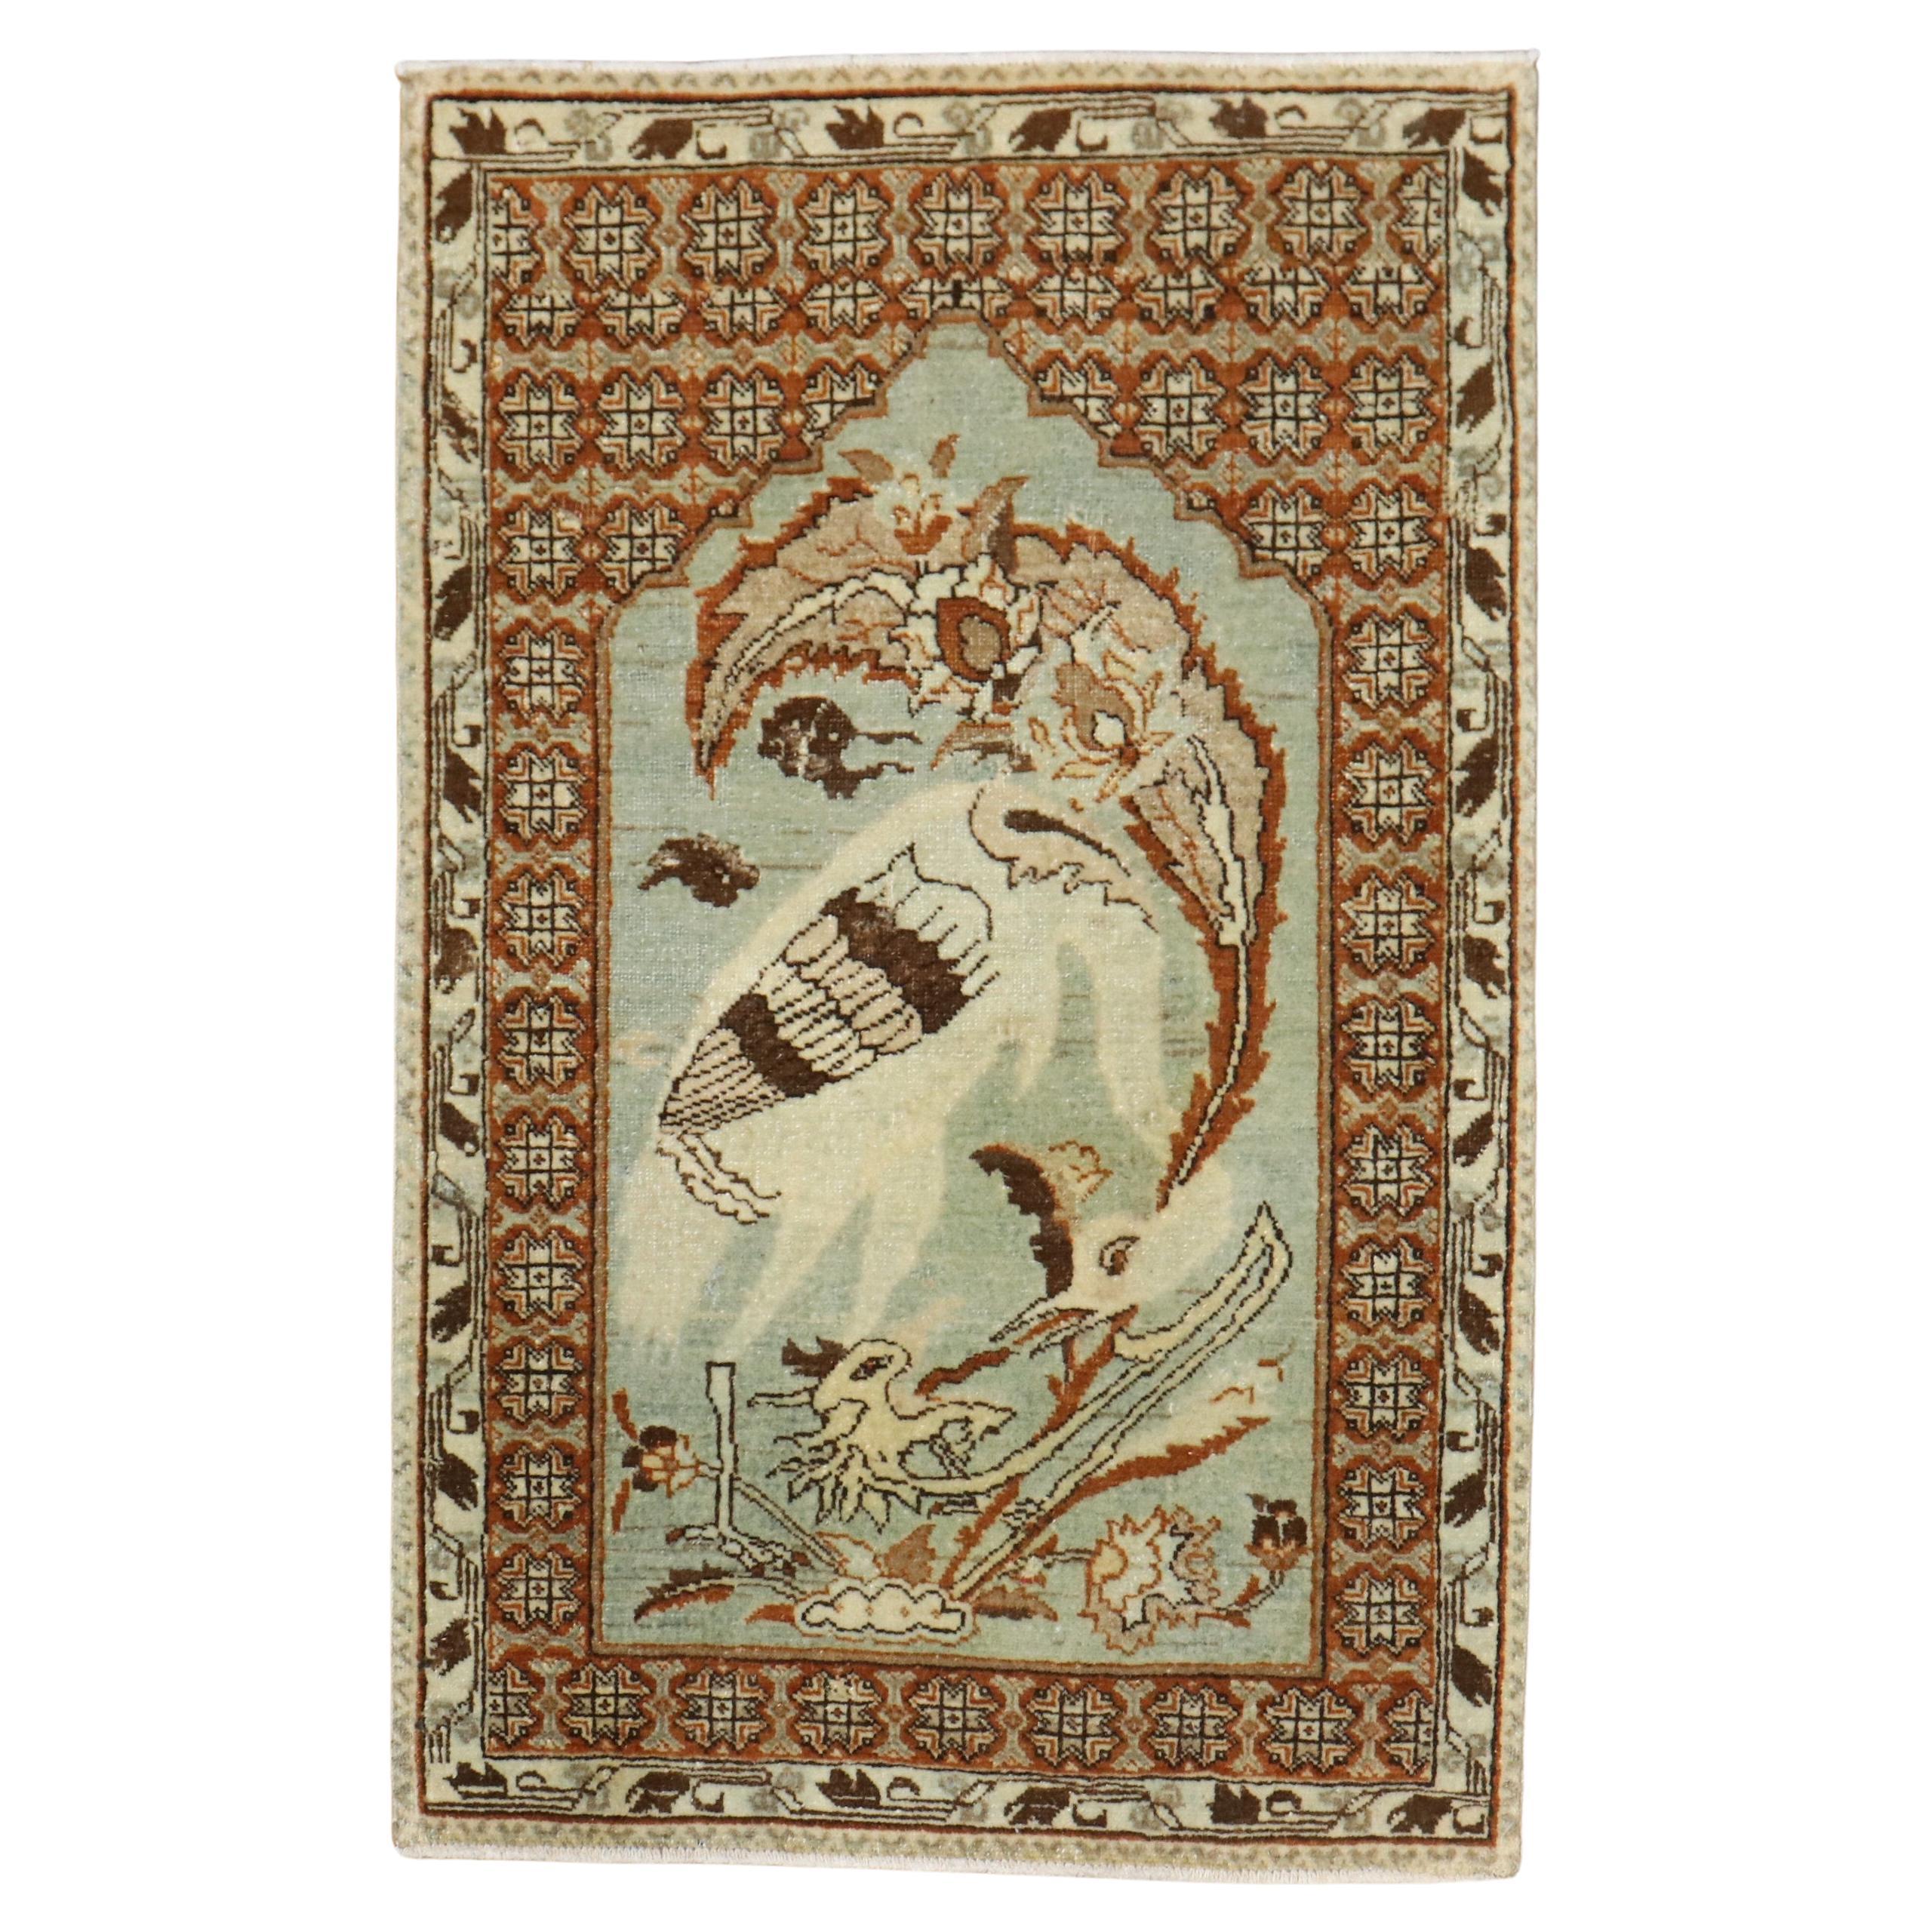 The Collective Rooster Swan Antique Persian Tabriz Rug Mat